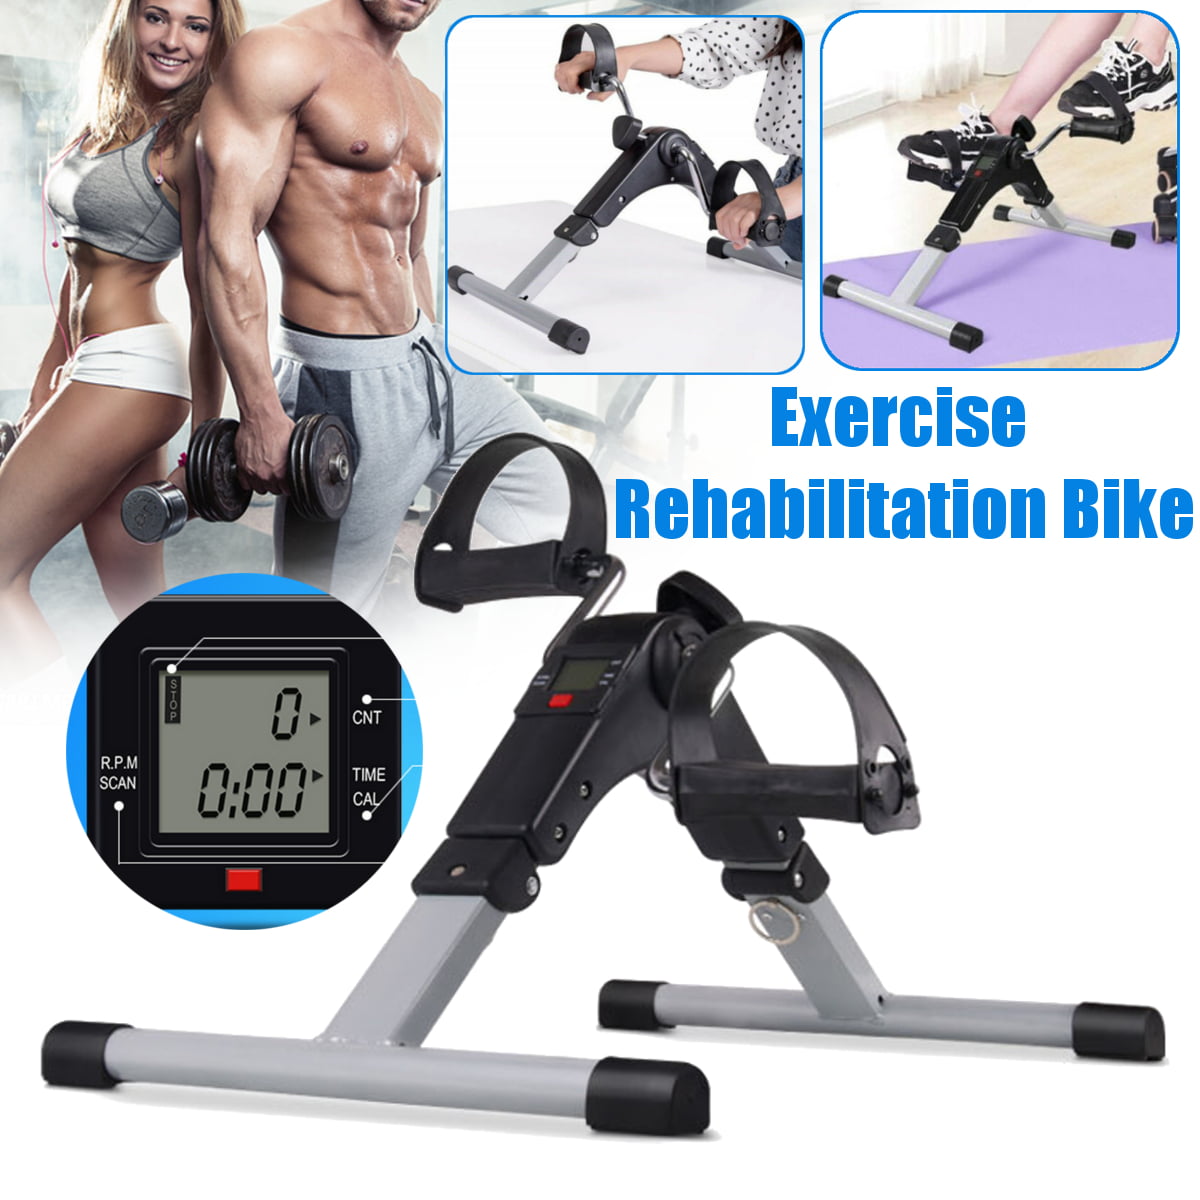 Mini Pedal Exercise Machine Cycle Fitness Digital Exerciser Bike Stationary Home 